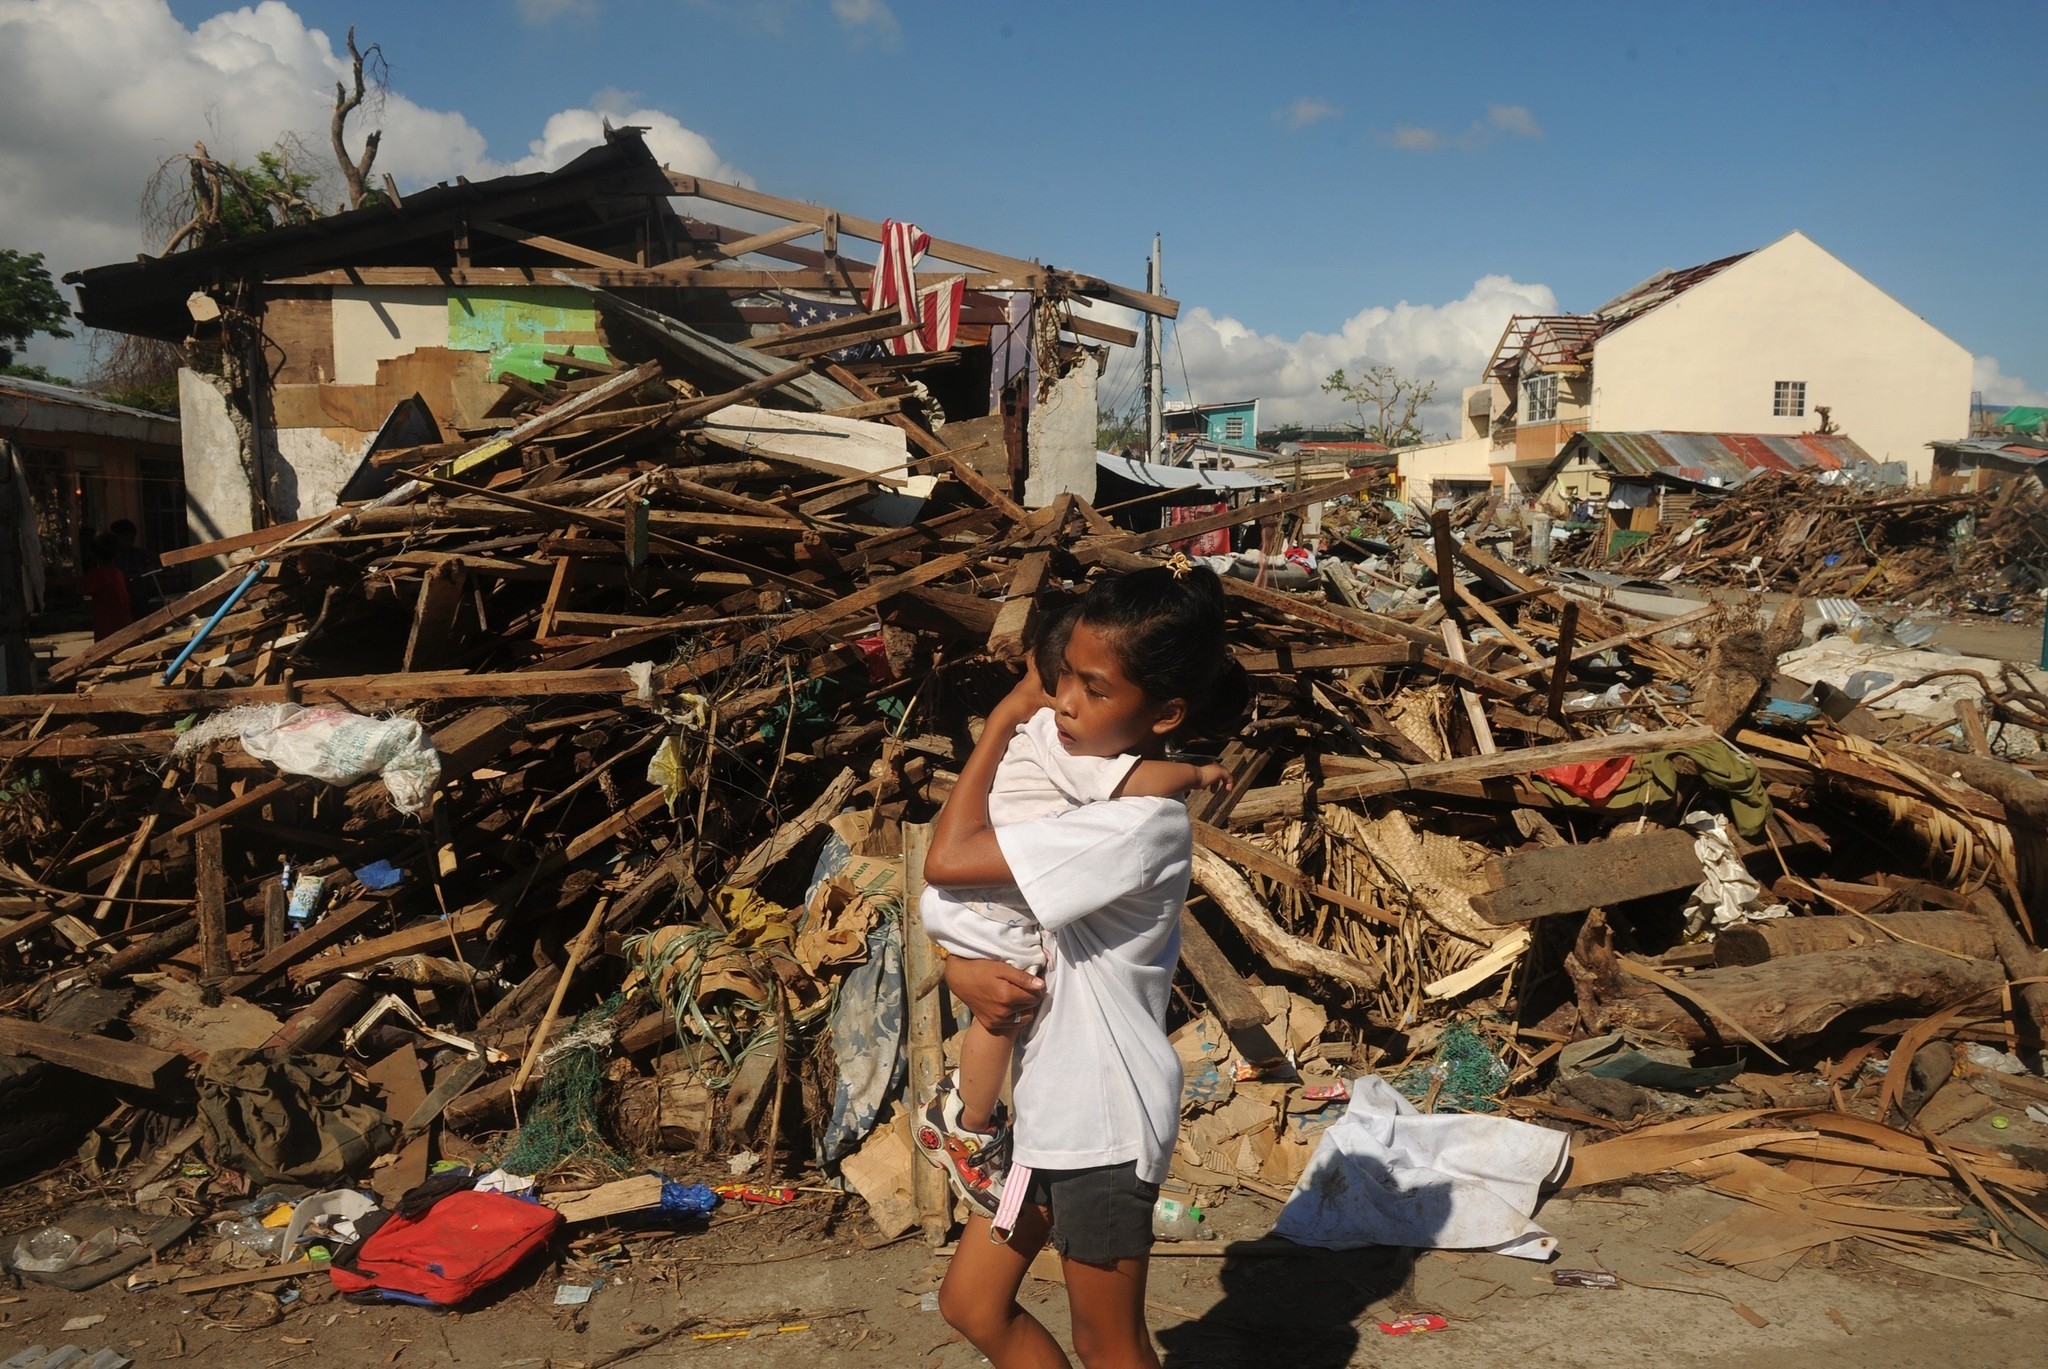 Corpses still scattered across parts of Tacloban